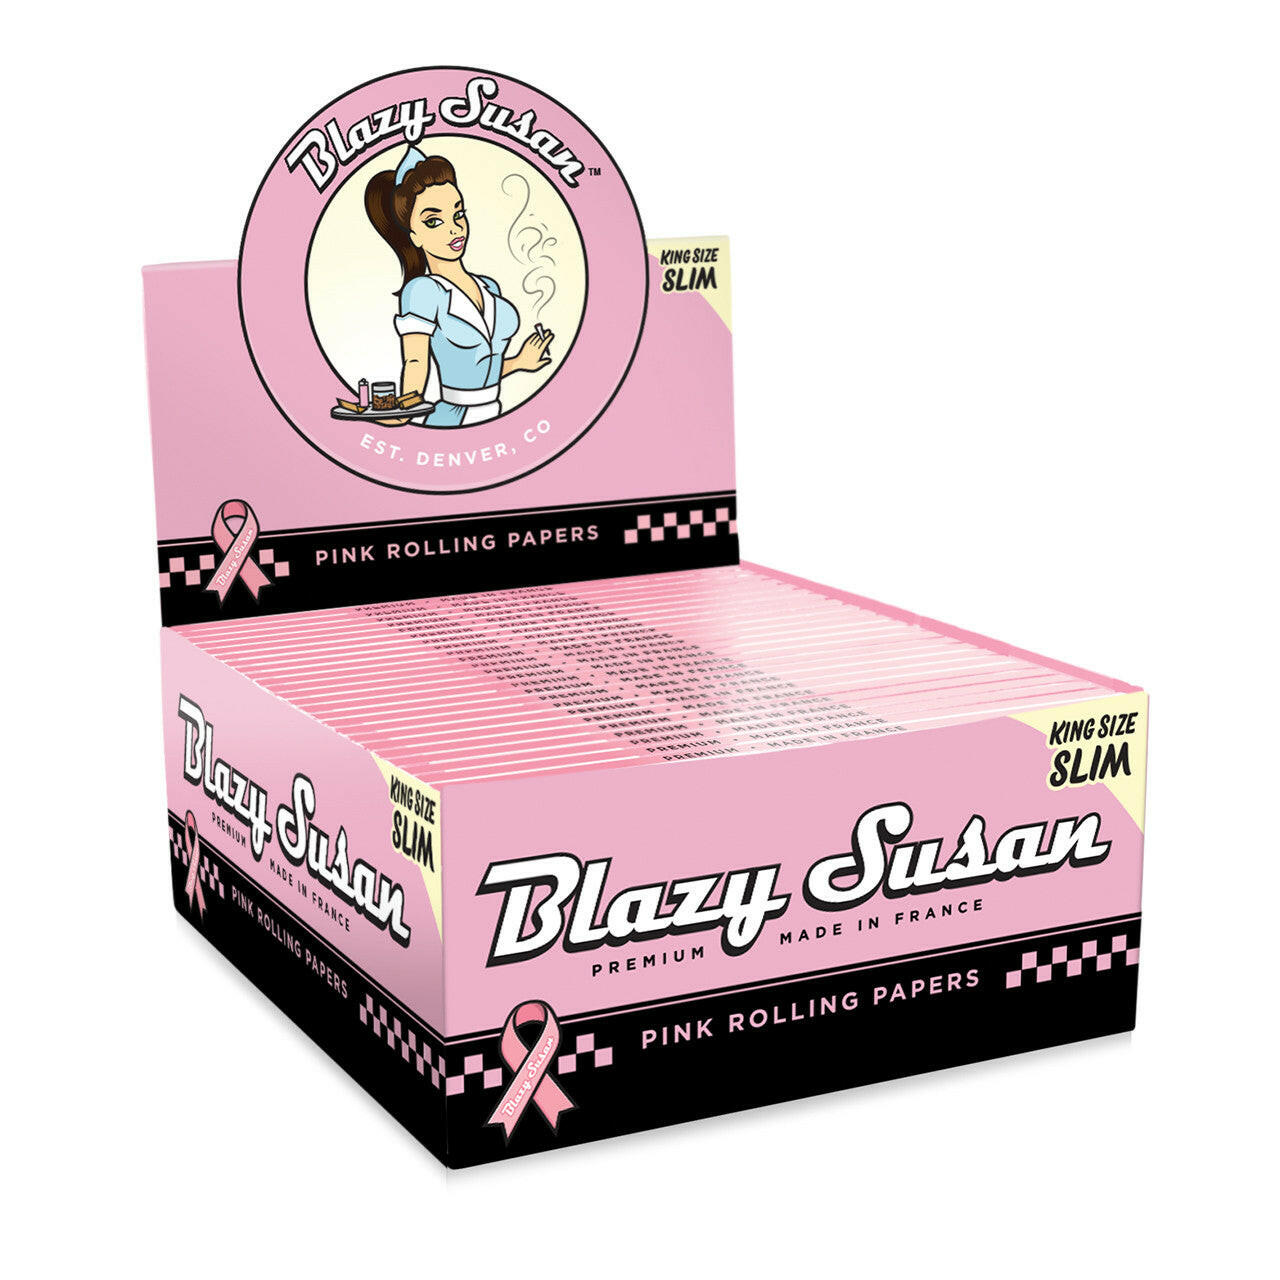 Blazy Susan Pink King Size Slim Rolling Papers (50ct)